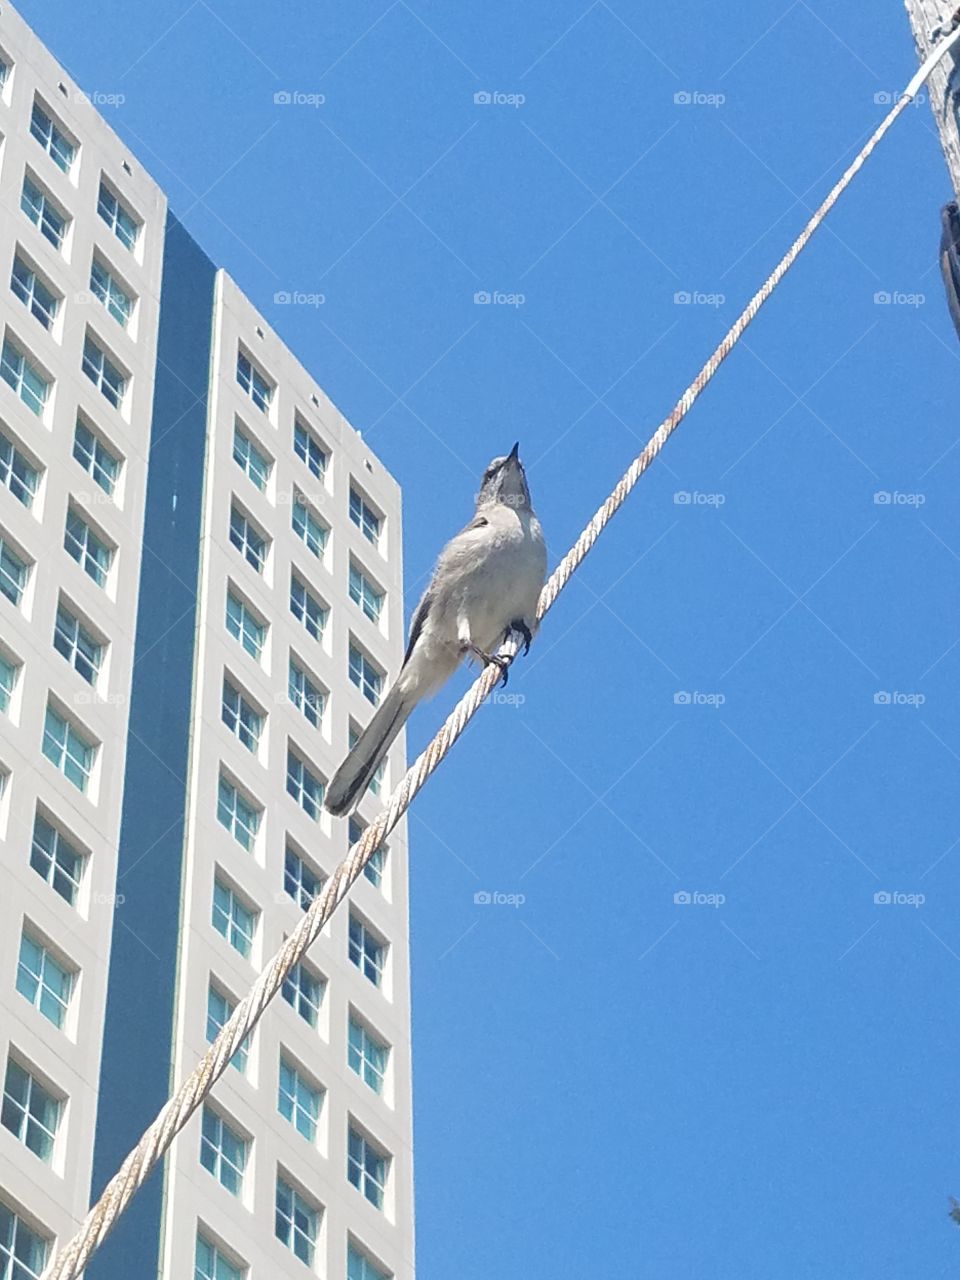 mocking bird on a wire against an urban setting with